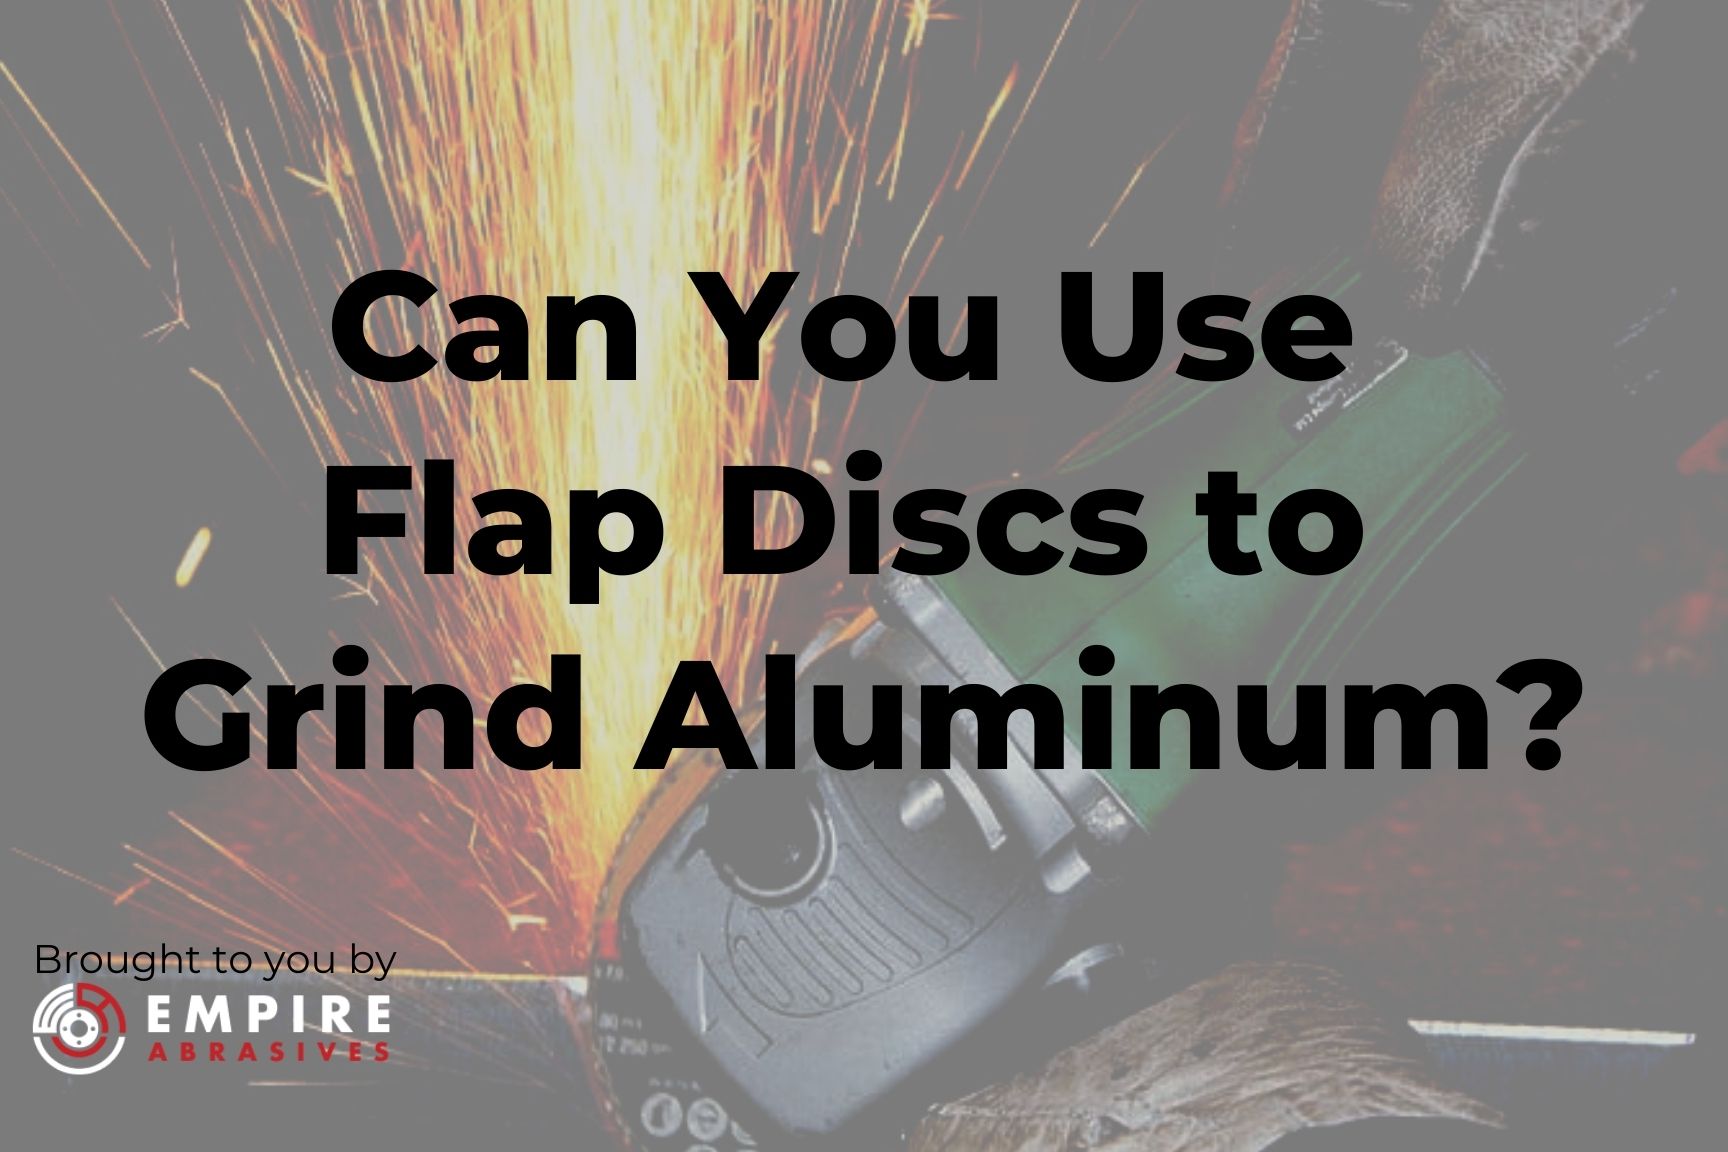 Can You Use Flap Discs to Grind Aluminum?